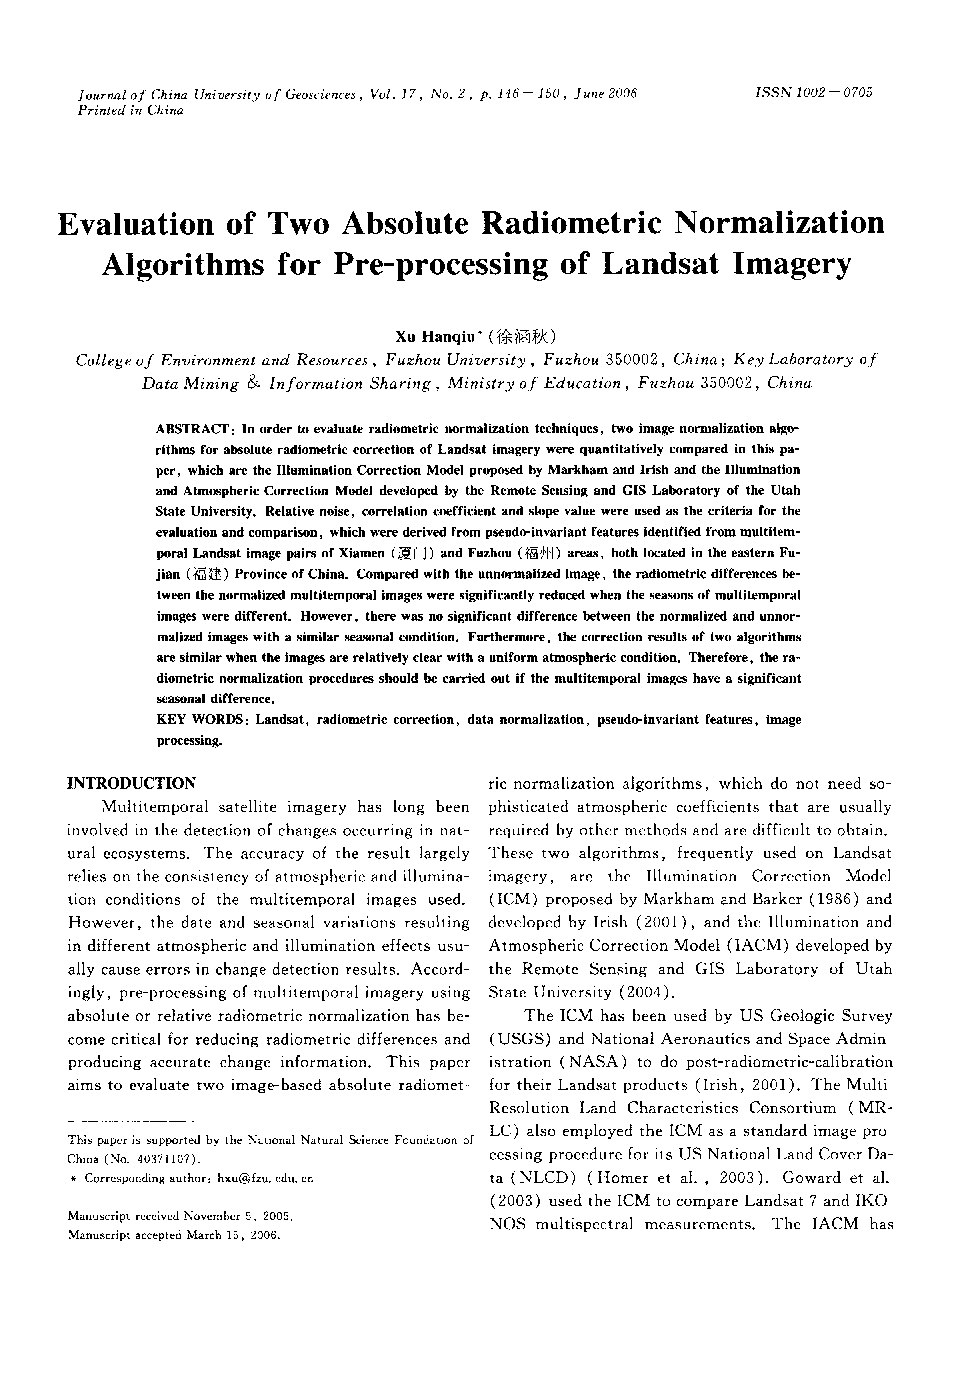 Evaluation of Two Absolute Radiometric Normalization Algorithms for Pre-processing of Landsat Imagery